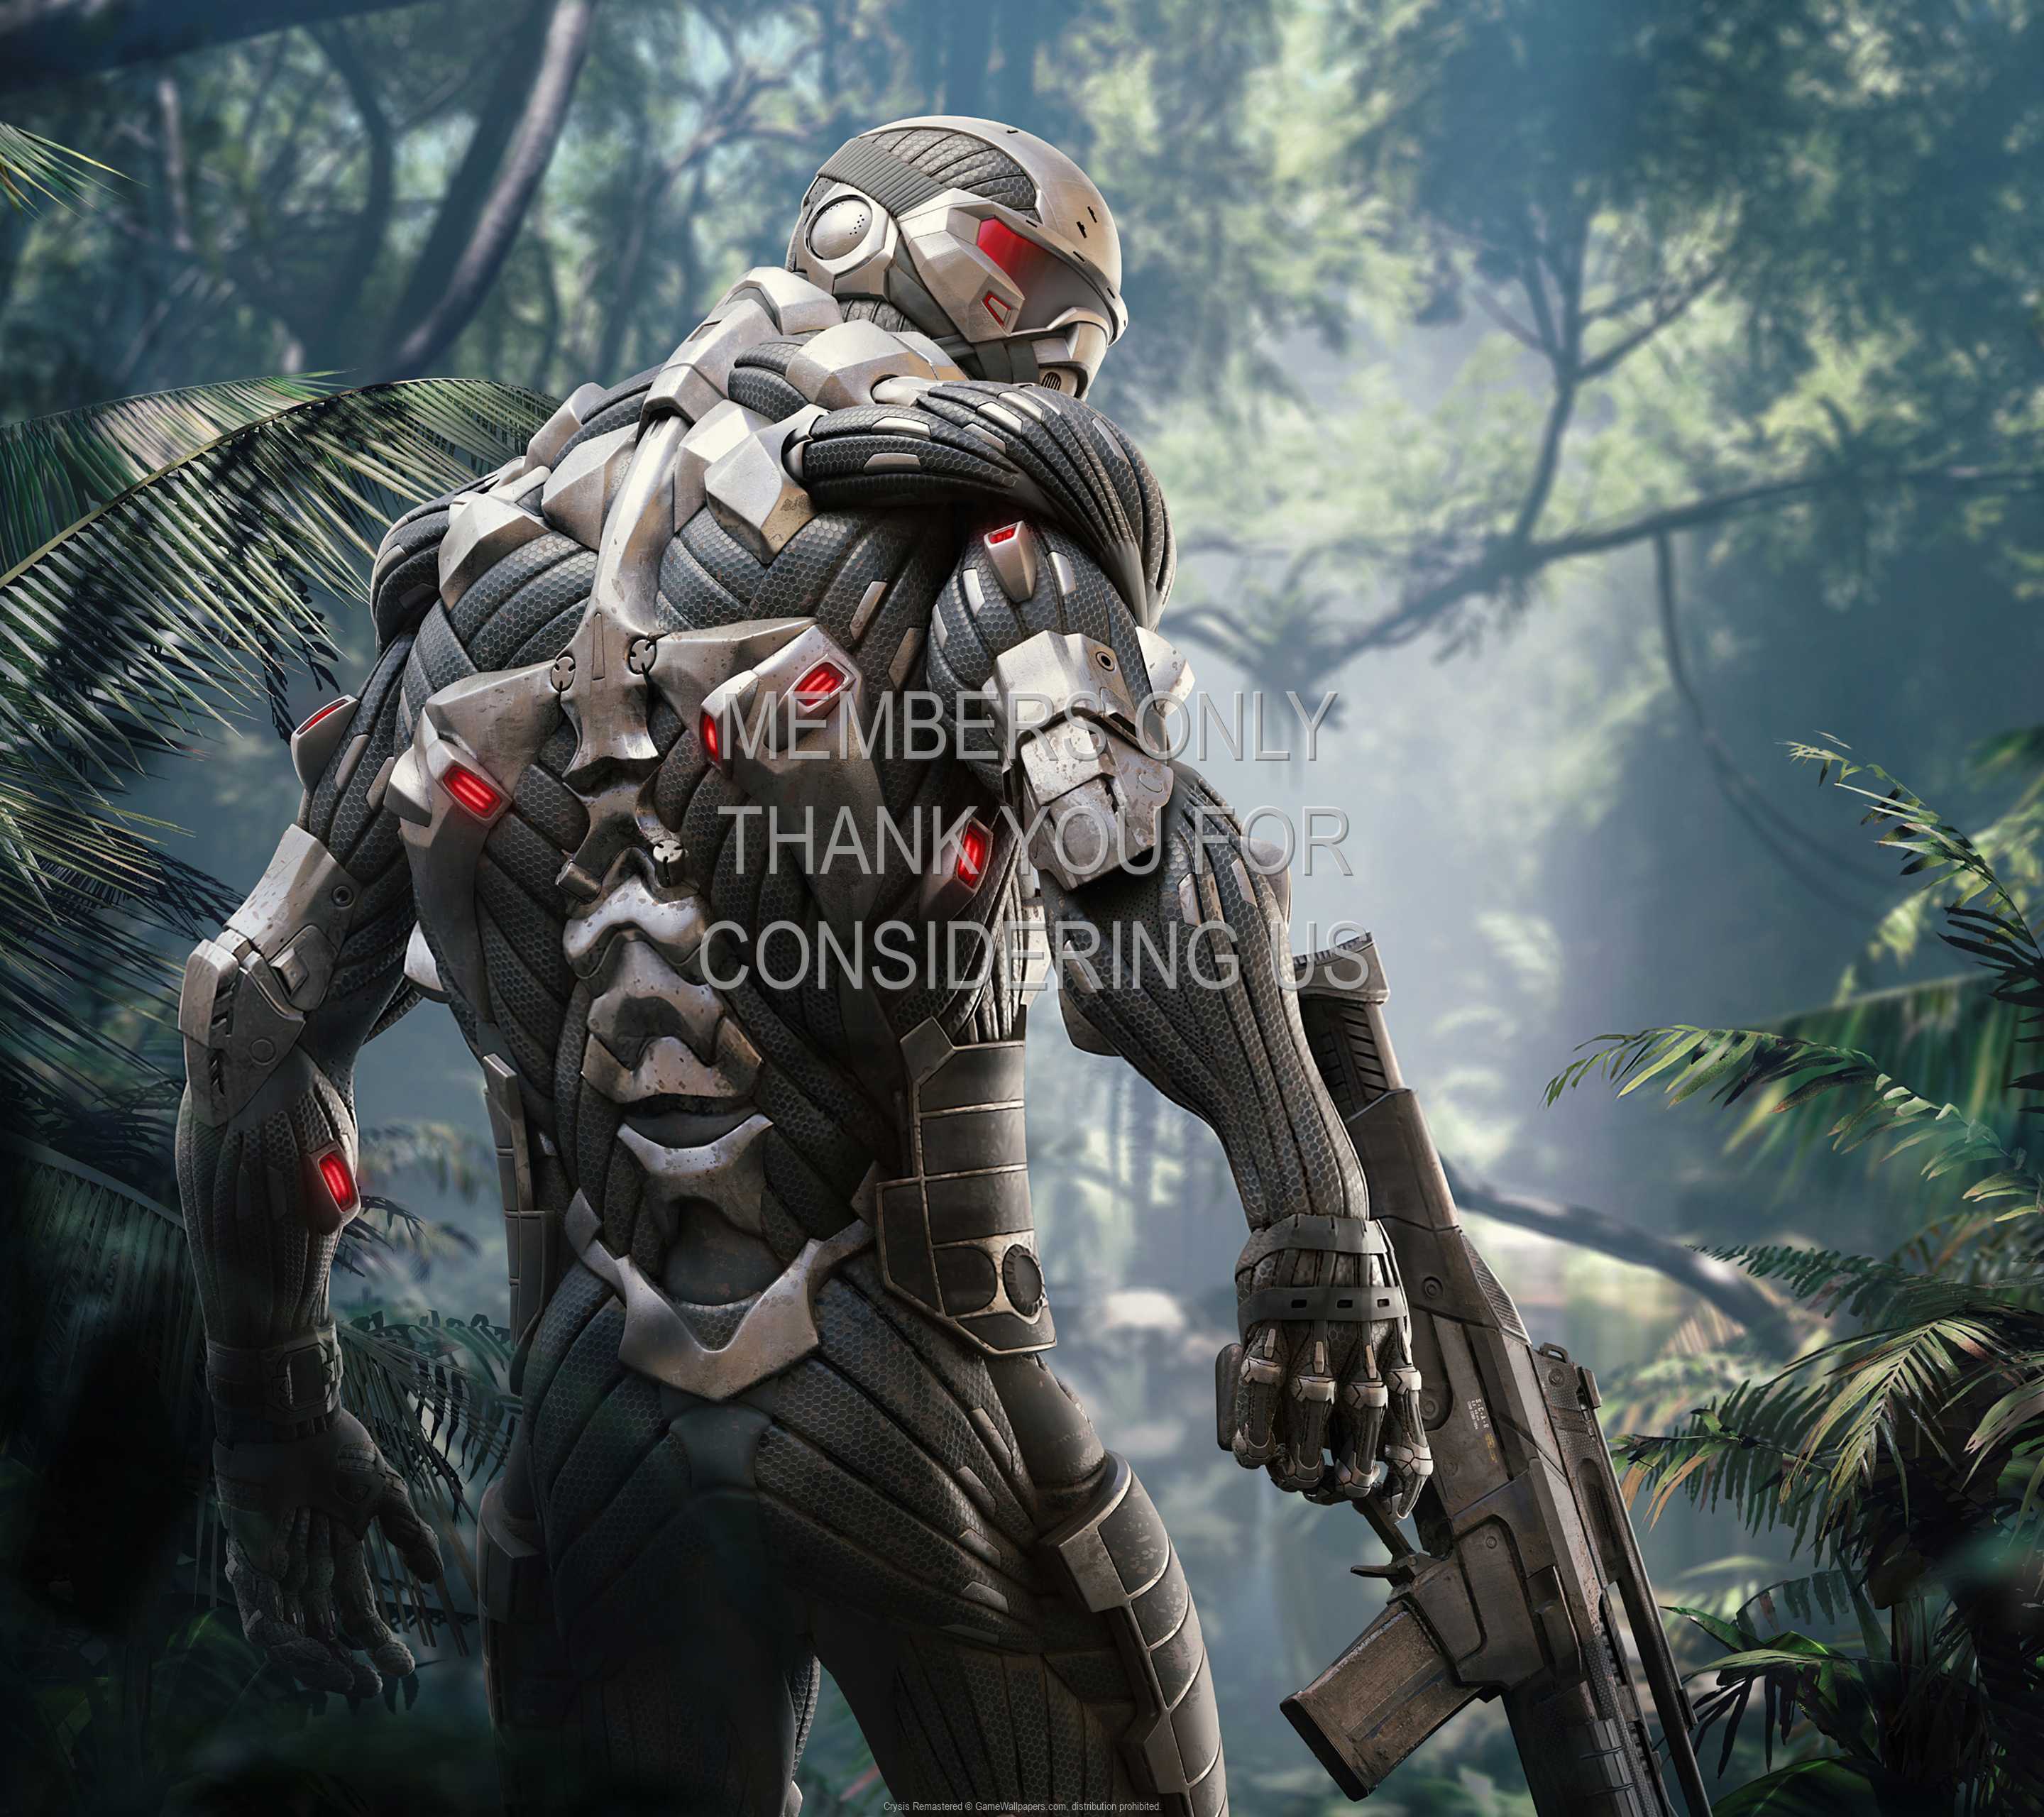 Crysis: Remastered 1440p Horizontal Mobile wallpaper or background 01